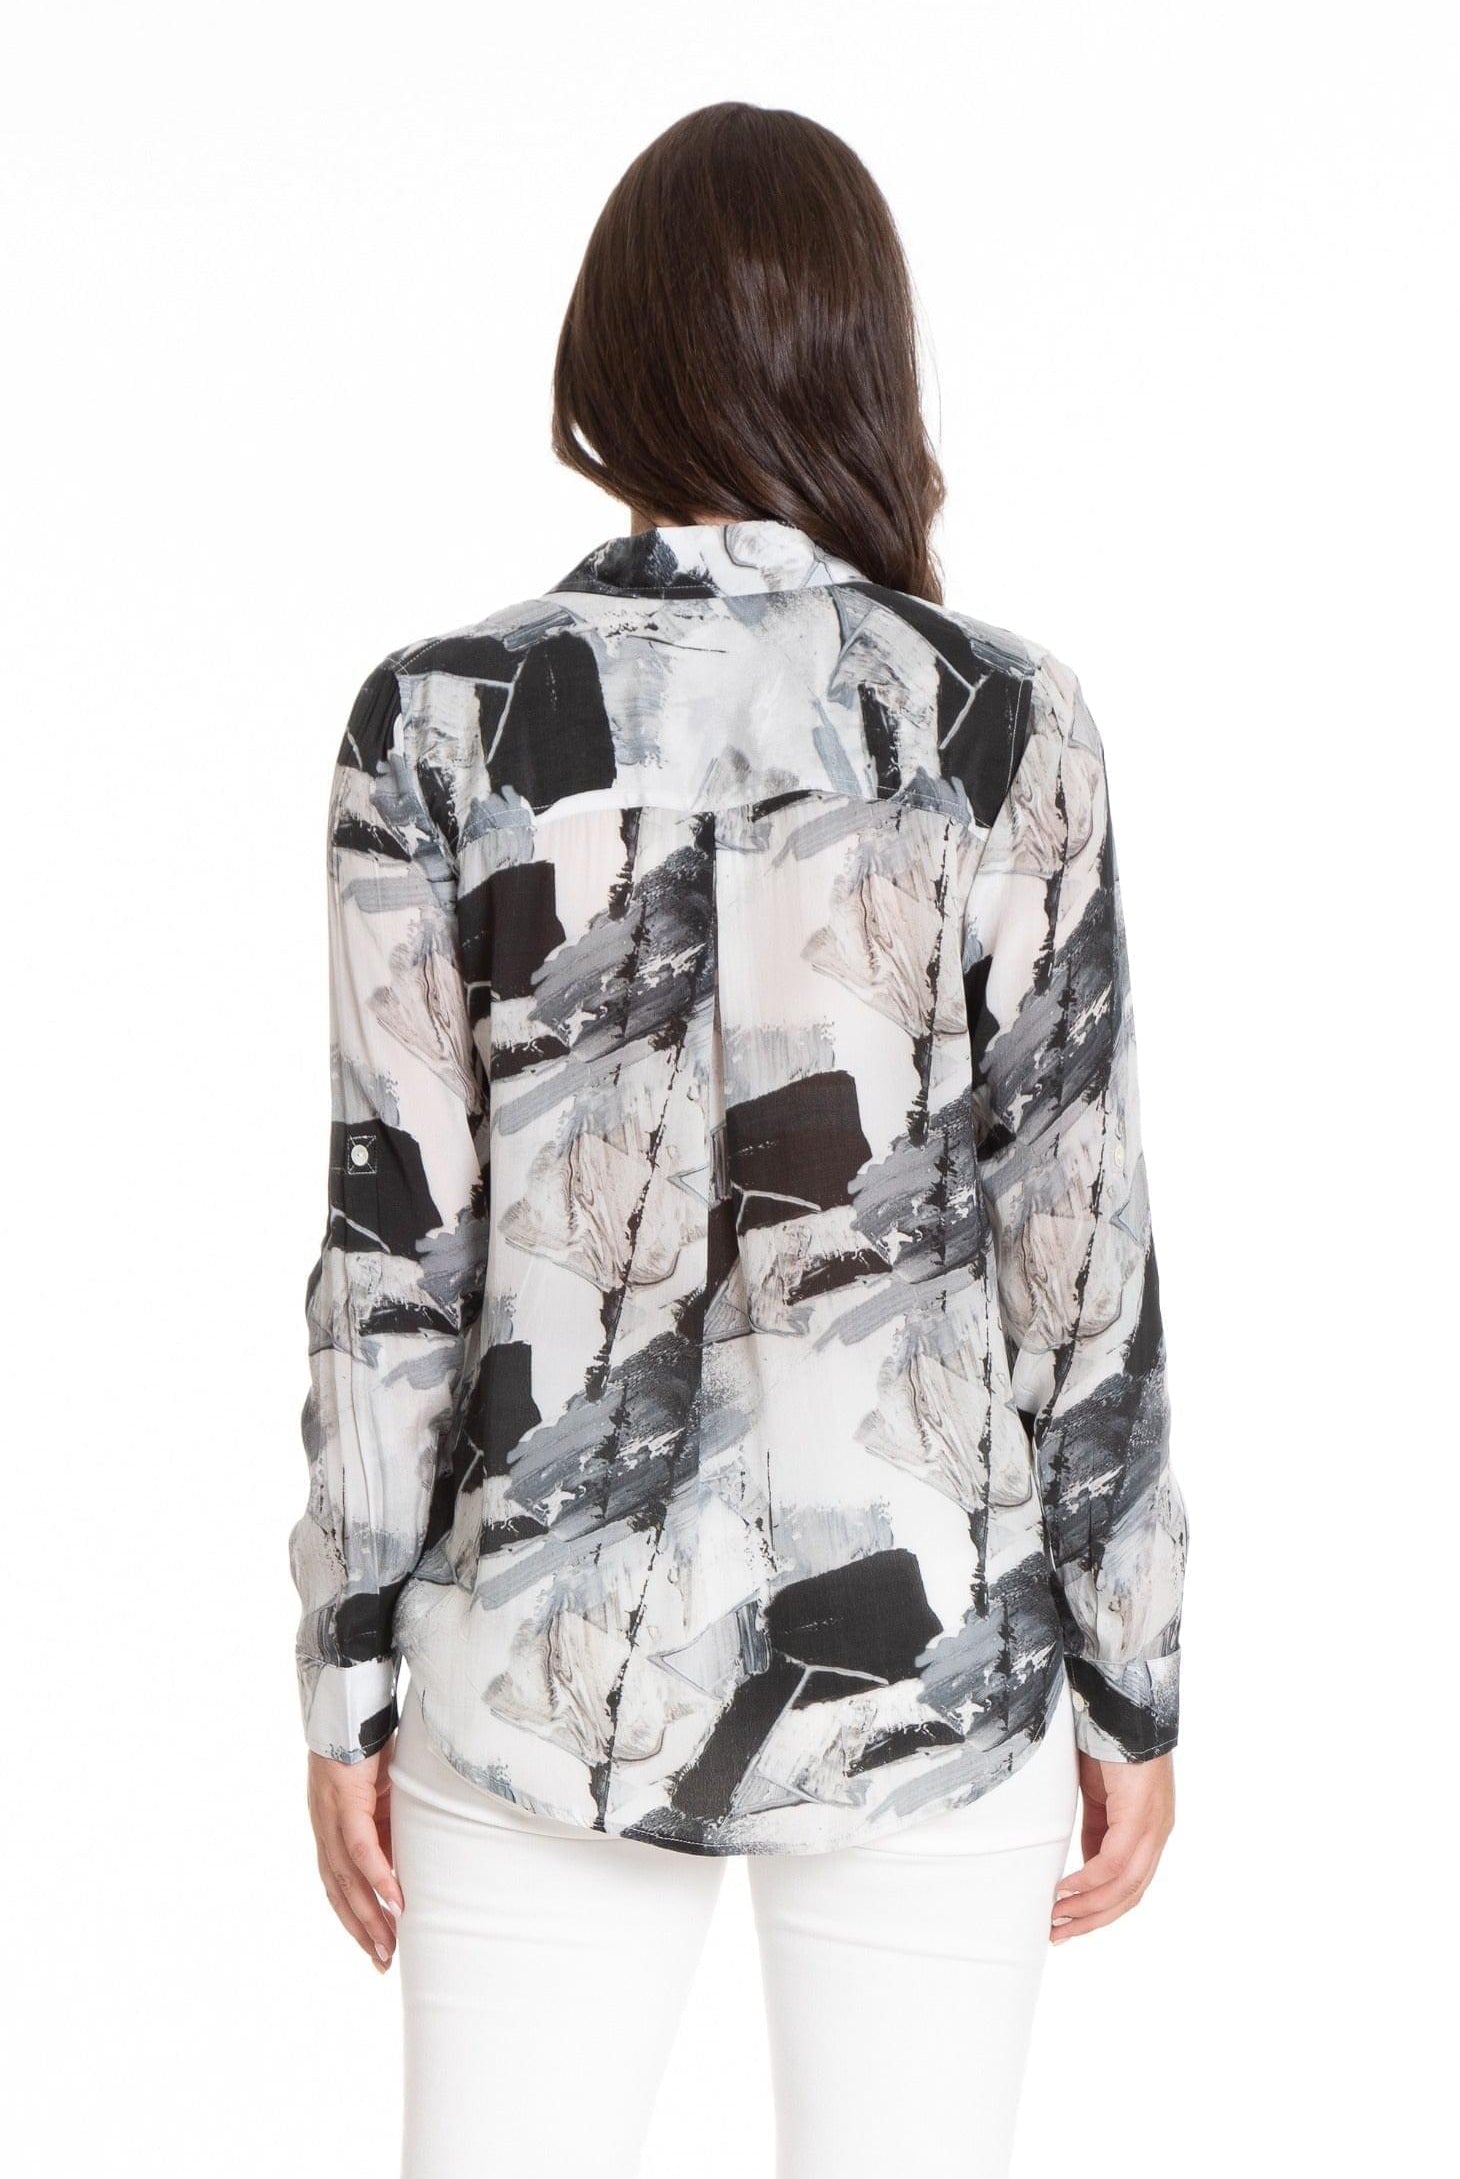 Black & White Abstract - Button-up with Roll-up Sleeve Back APNY